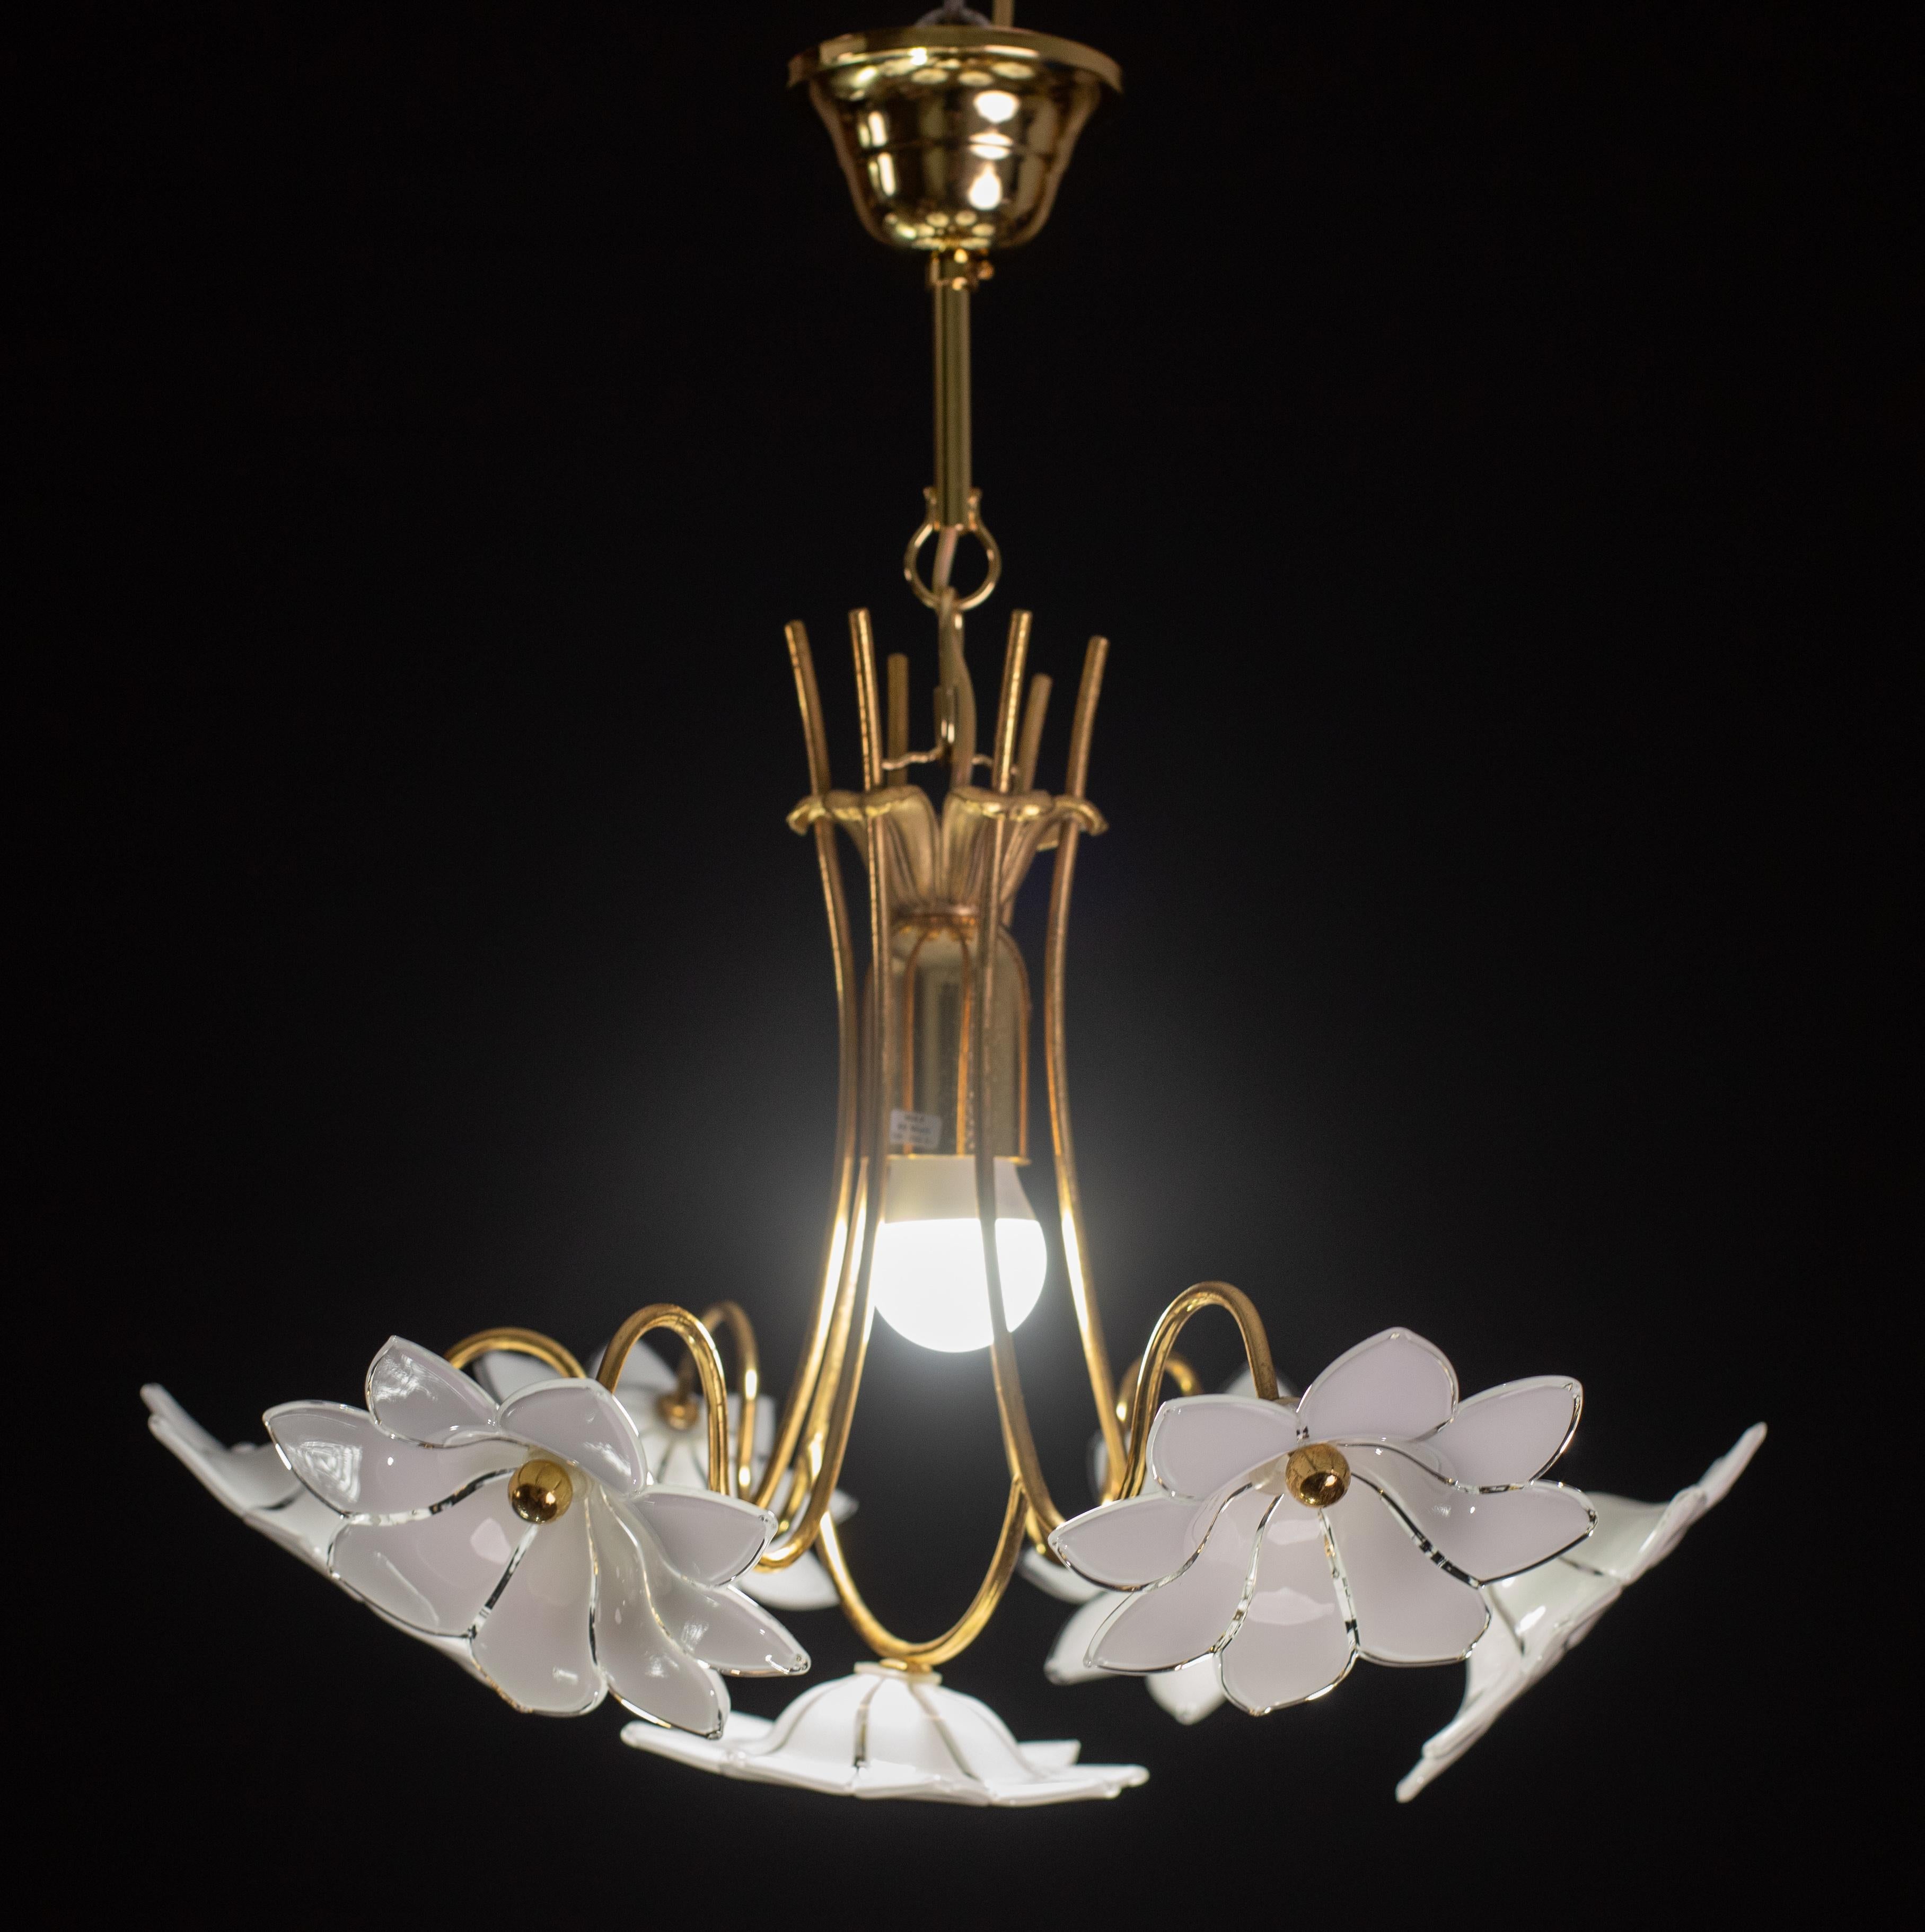 Vintage Murano glass chandelier with white flowers.
The chandelier has 1 light points with E27 connection, possible to rewire for USa.
The frame is in good vintage condition.
The height of the chandelier is 45 cm, 30 with no chain, the diameter is